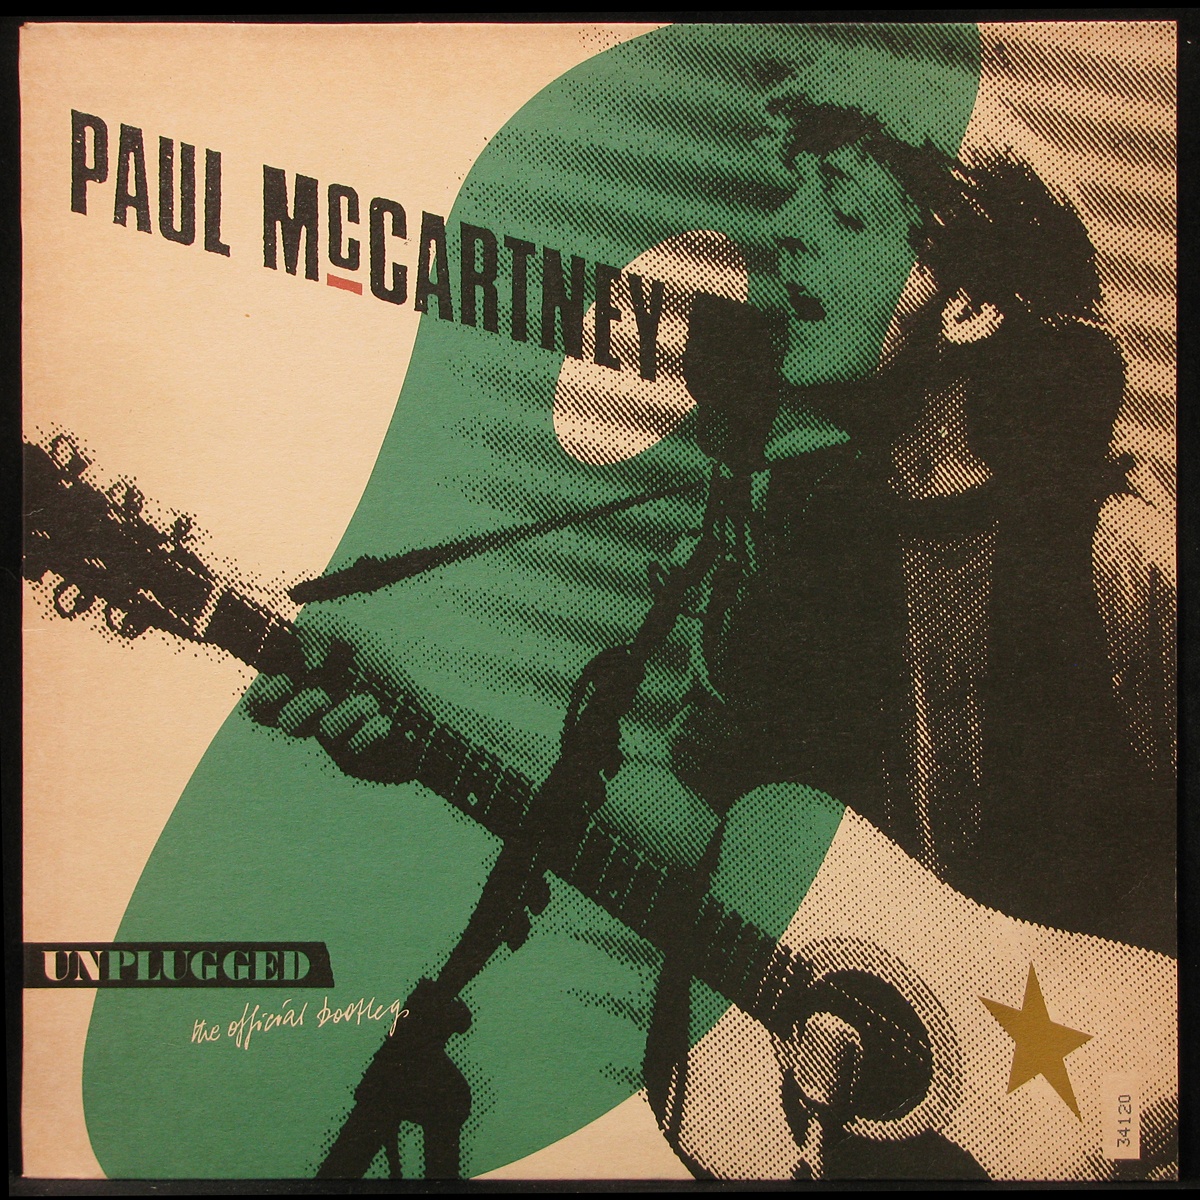 LP Paul McCartney — Unplugged (The Official Bootleg) фото